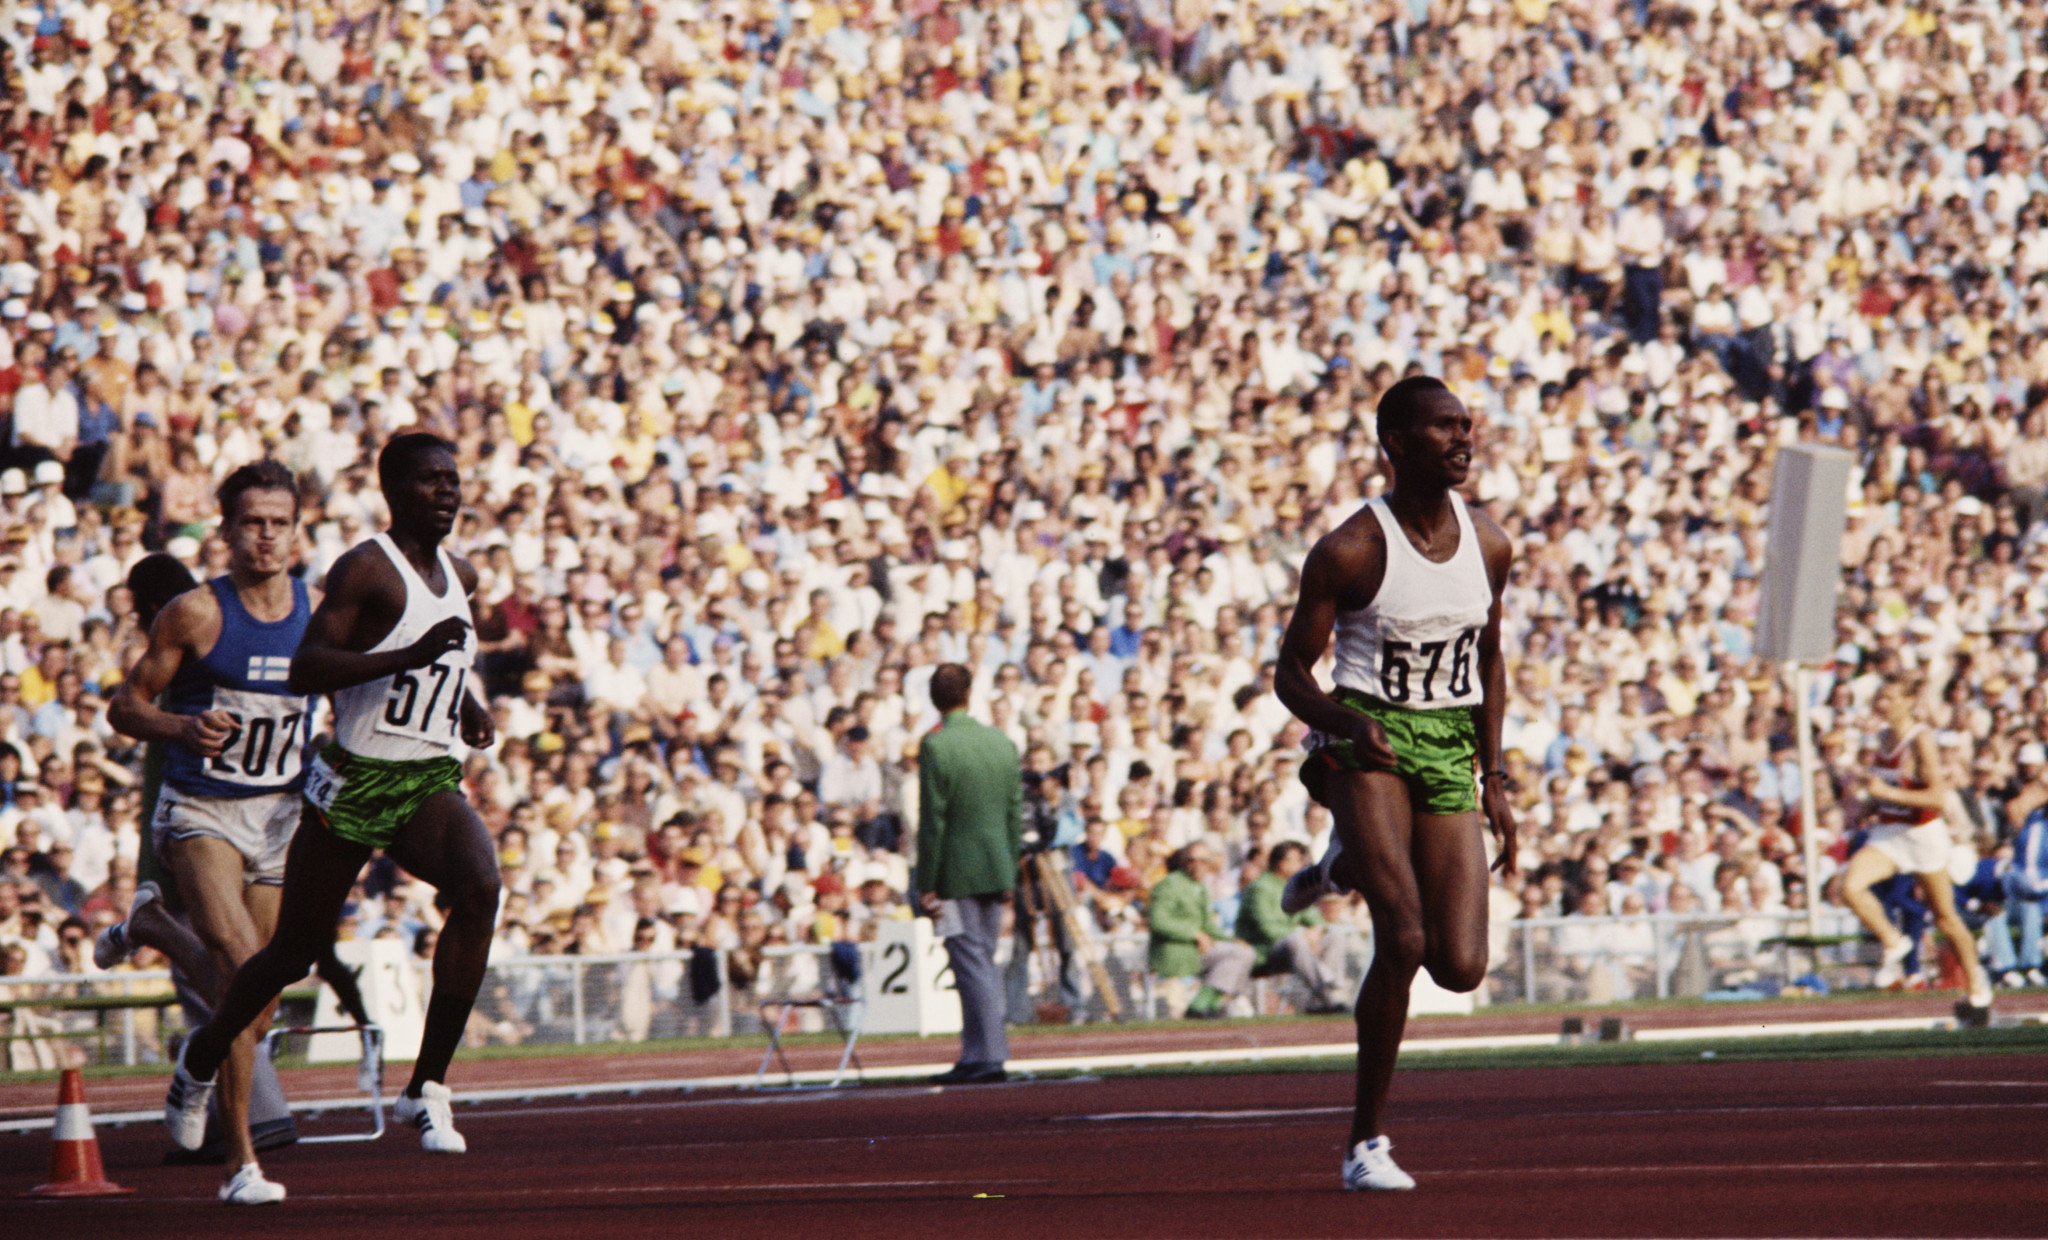 Ben Jipcho, wearing 574, won an Olympic silver medal at Munich 1972 ©Getty Images